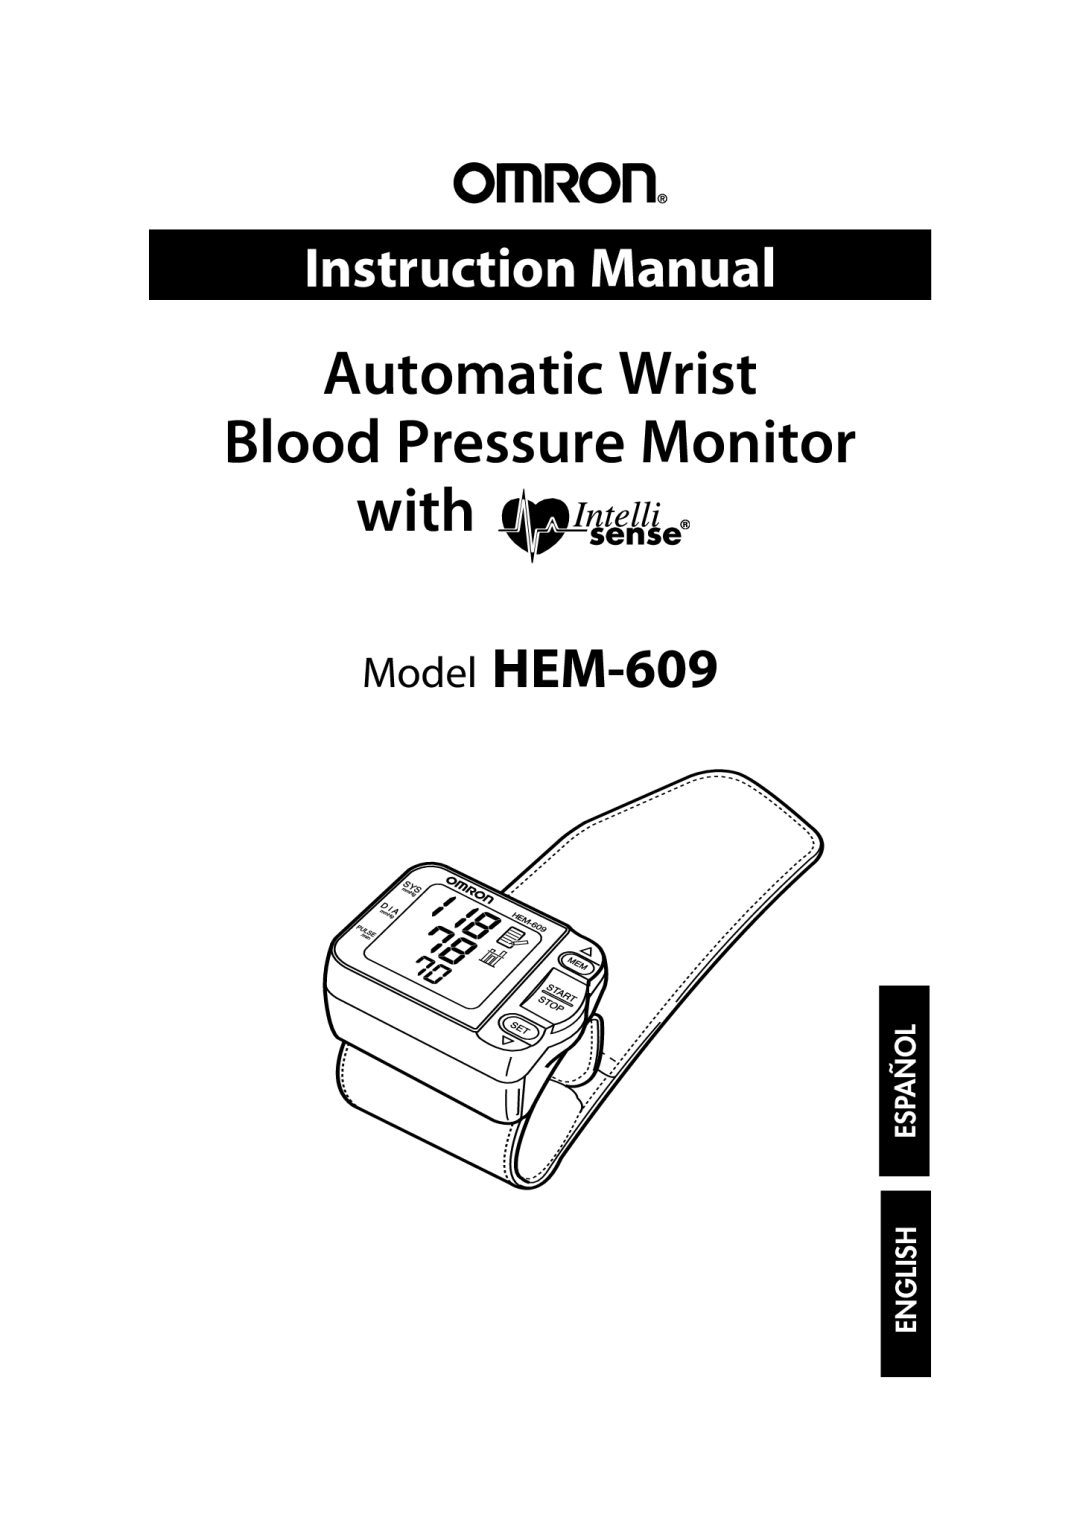 Omron Healthcare instruction manual Automatic Wrist Blood Pressure Monitor with, Instruction Manual, Model HEM-609 